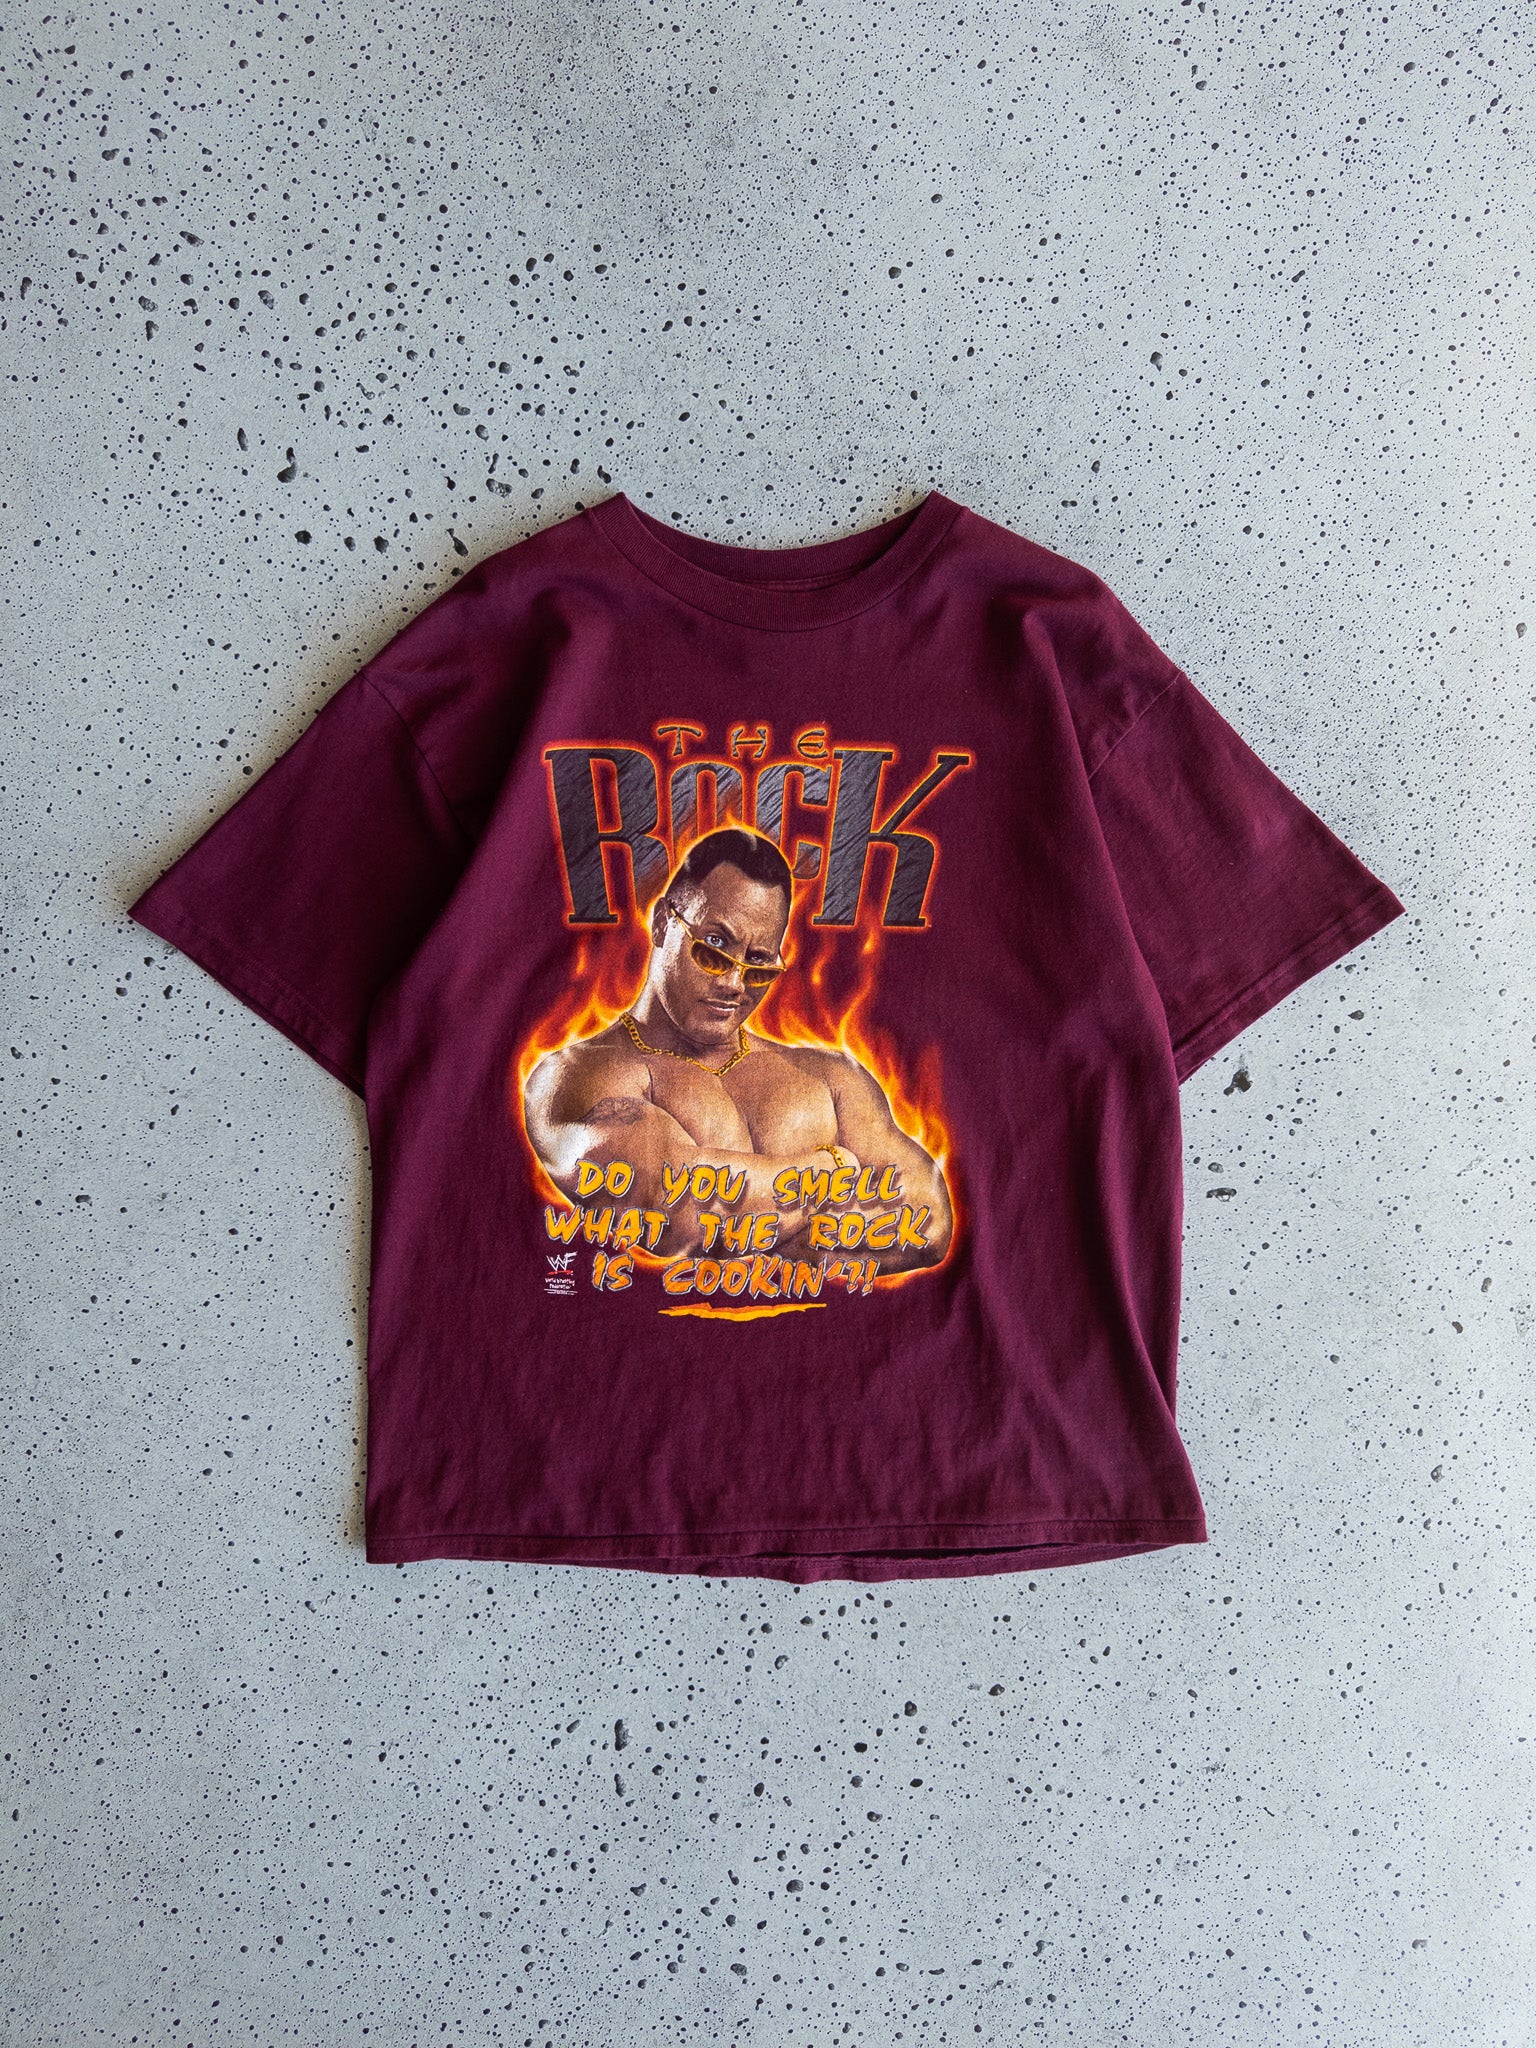 Vintage Do You Smell What THE ROCK Is Cookin' Tee (XL)